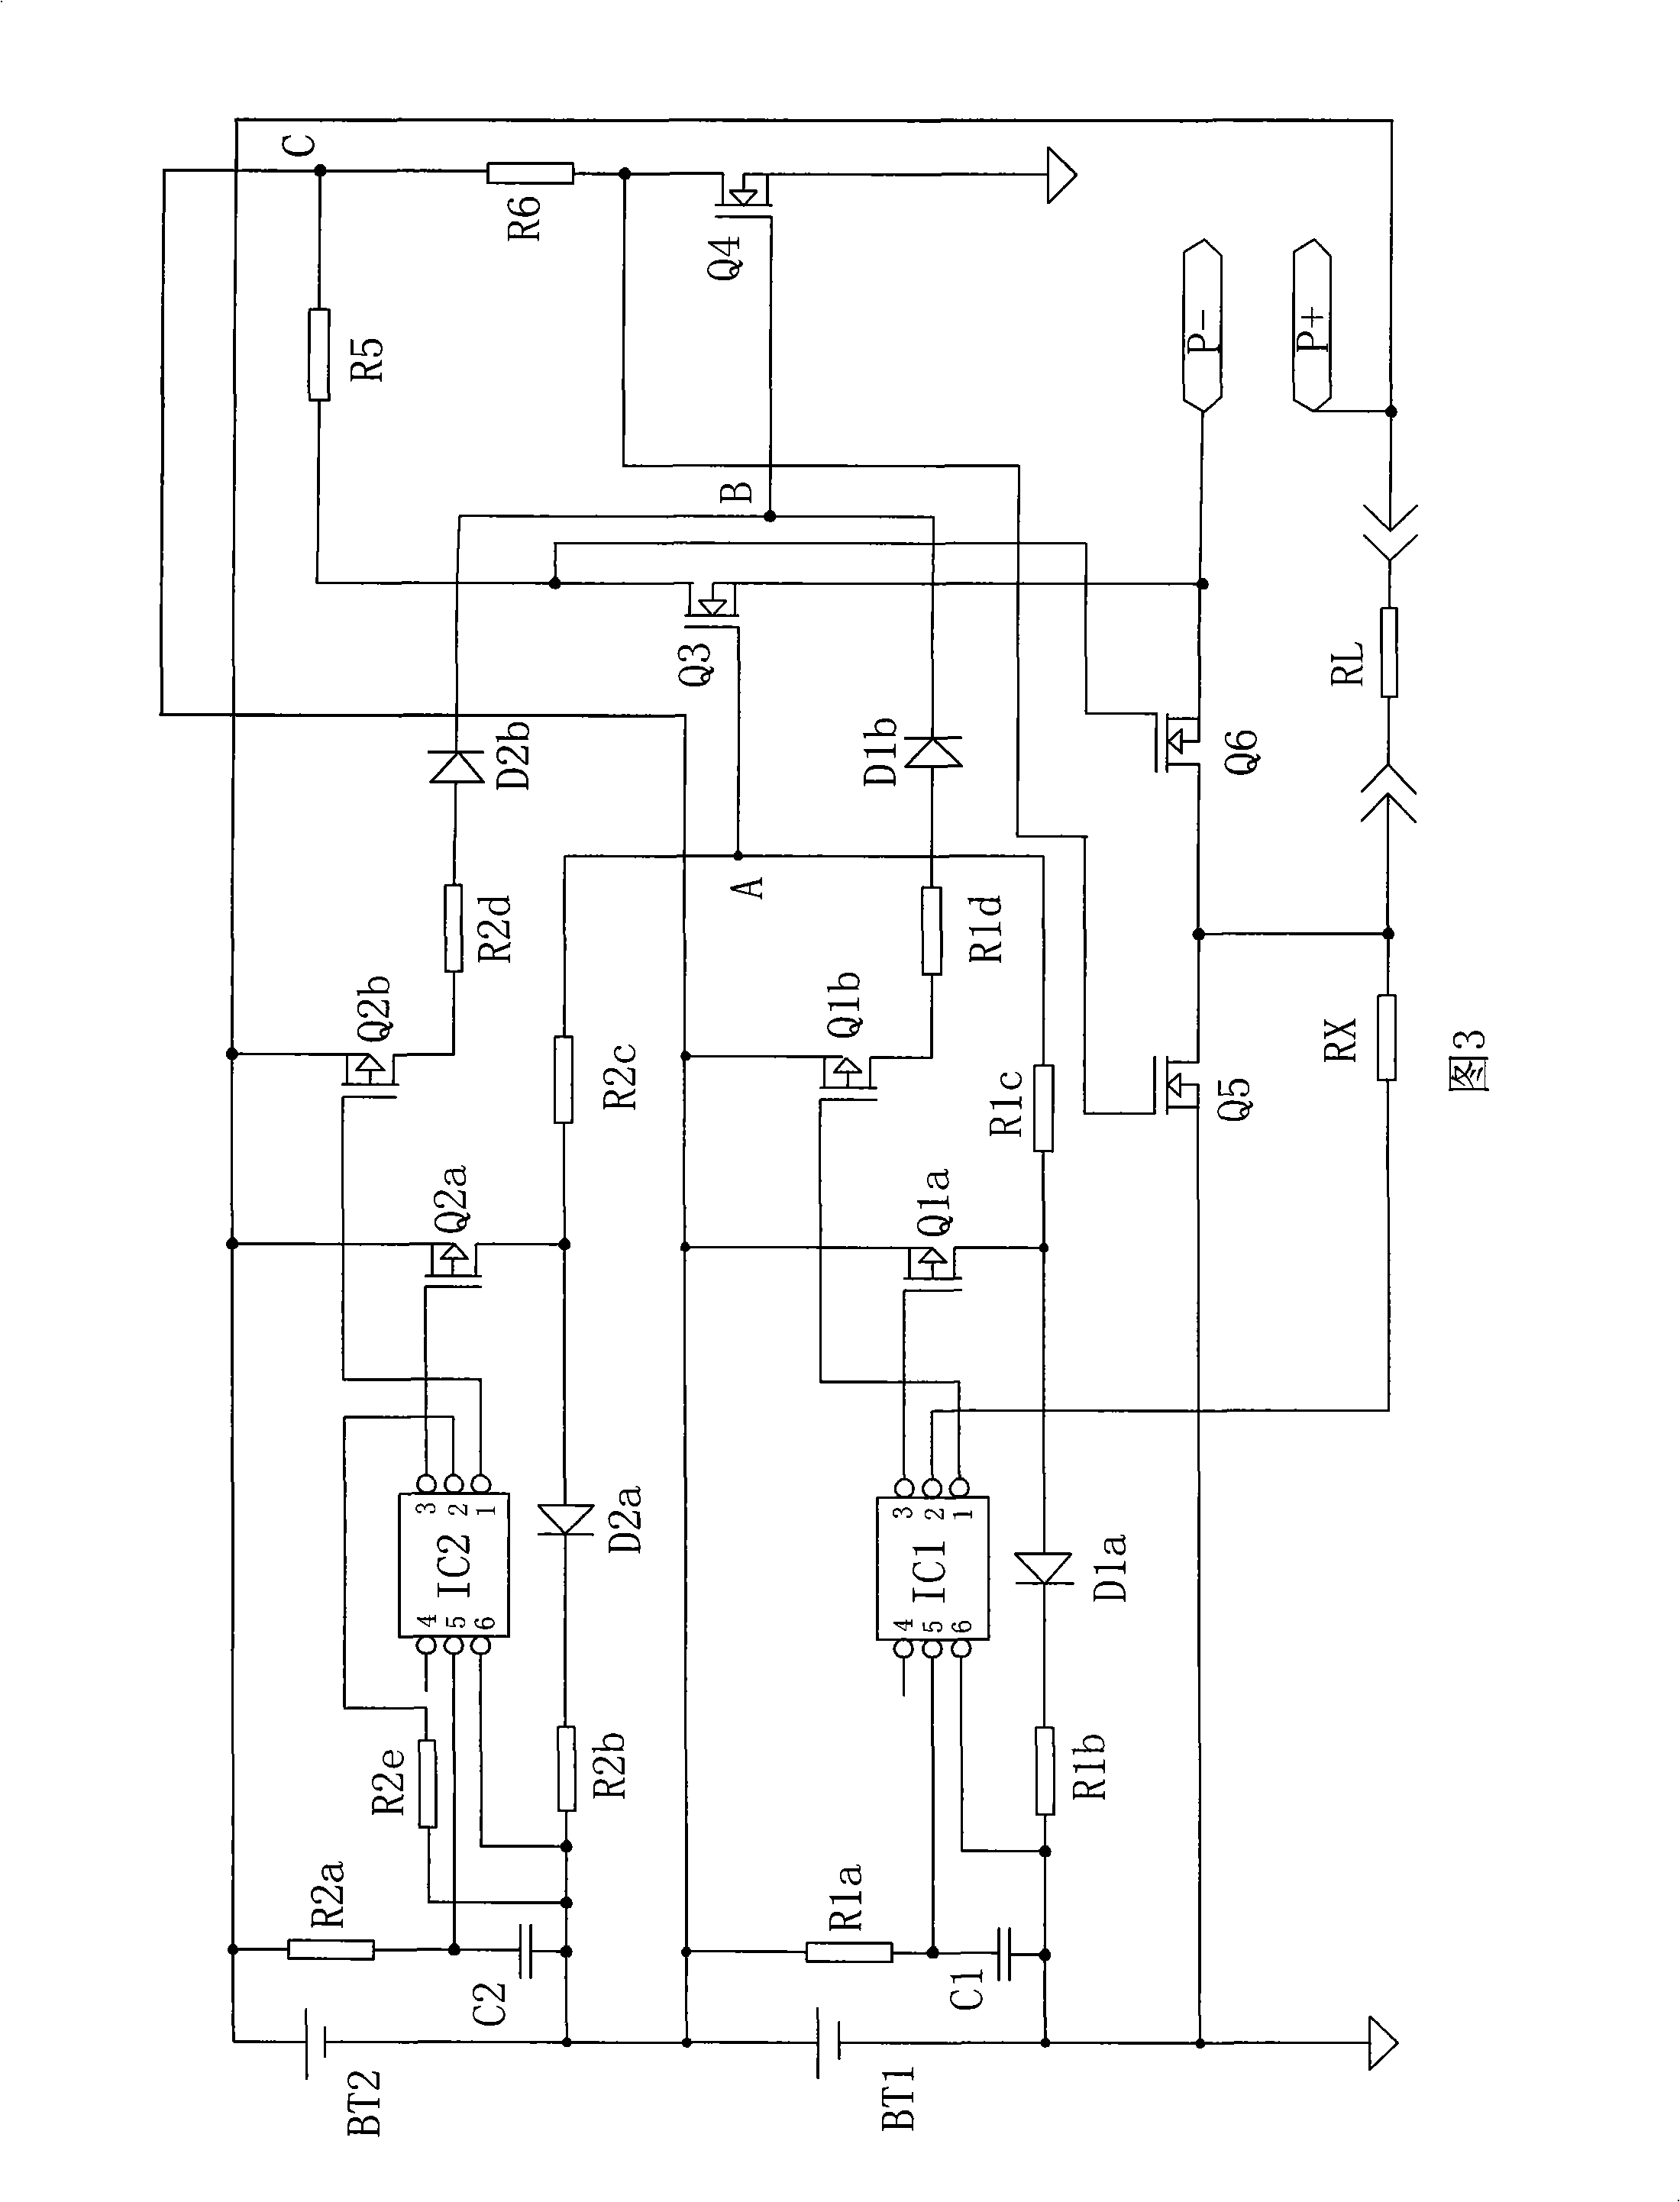 Charging and discharging protection circuit for multiple serial lithium battery